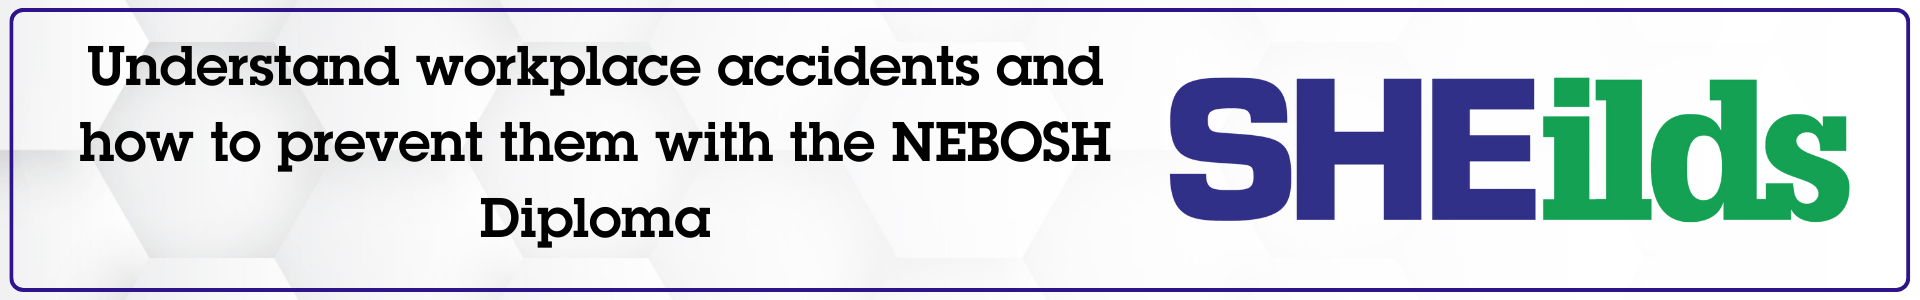 How to prevent workplace accidents with the NEBSOH Diploma